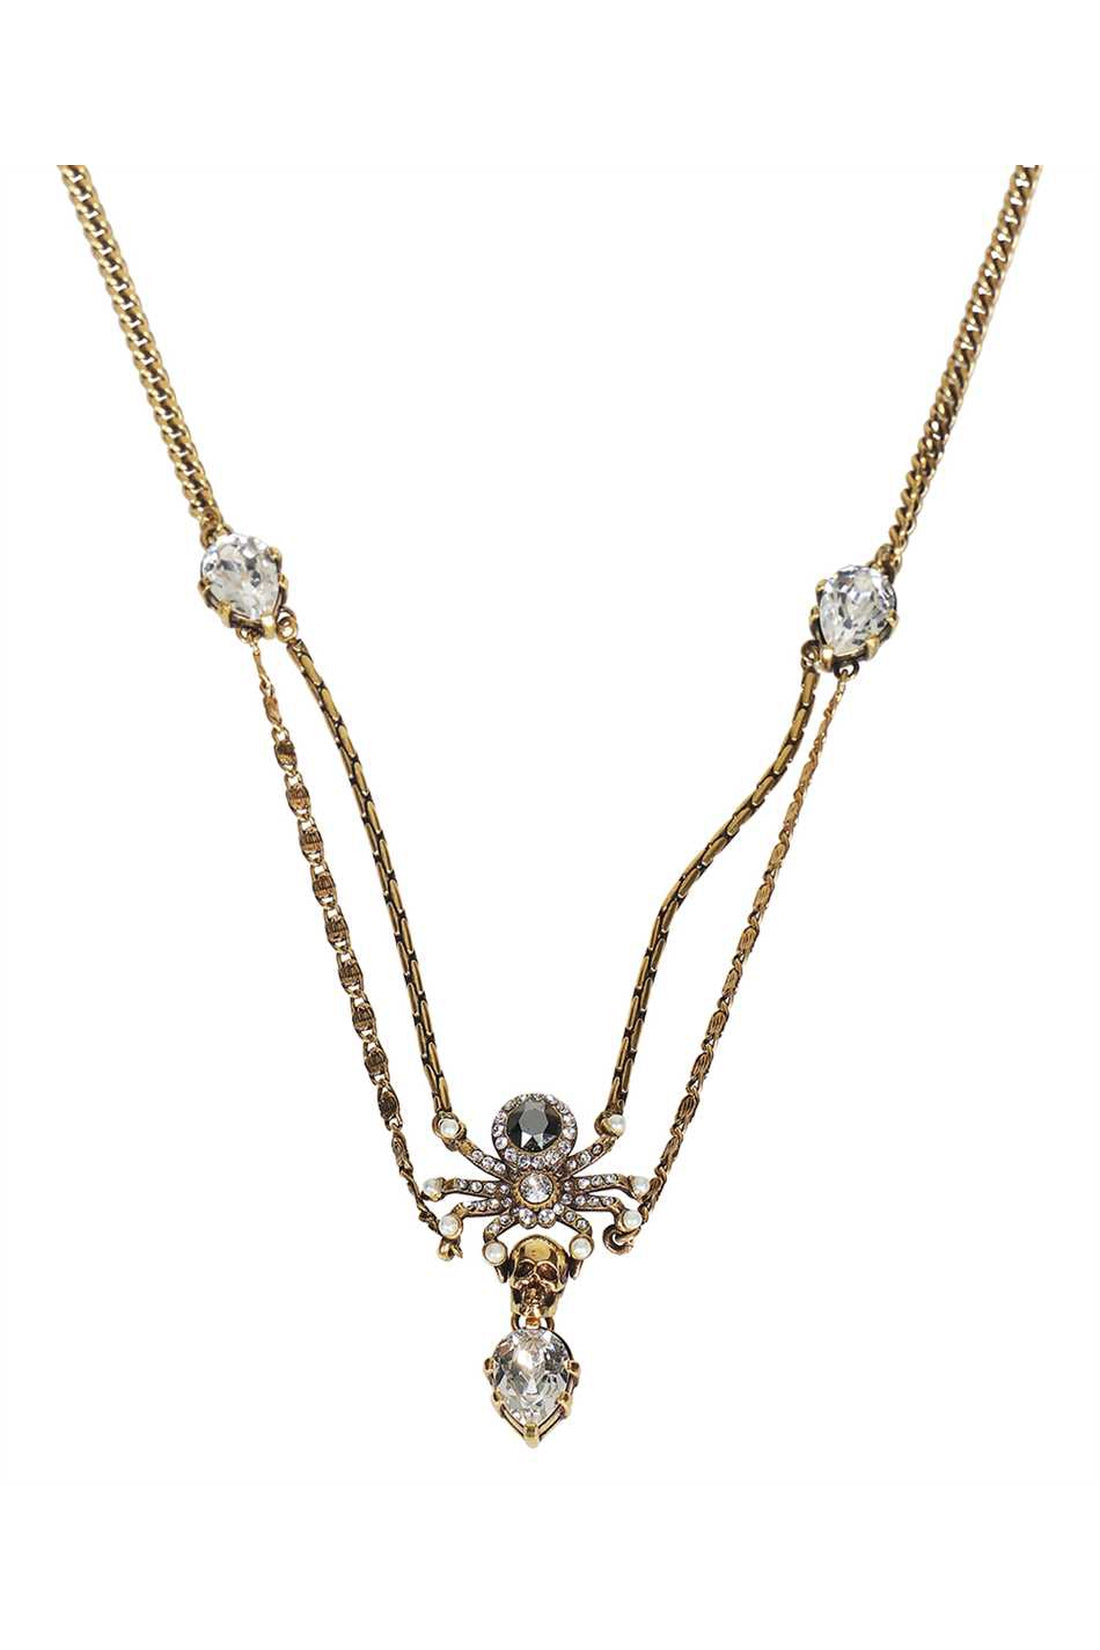 Alexander McQueen-OUTLET-SALE-Chain necklace with Skull detail-ARCHIVIST